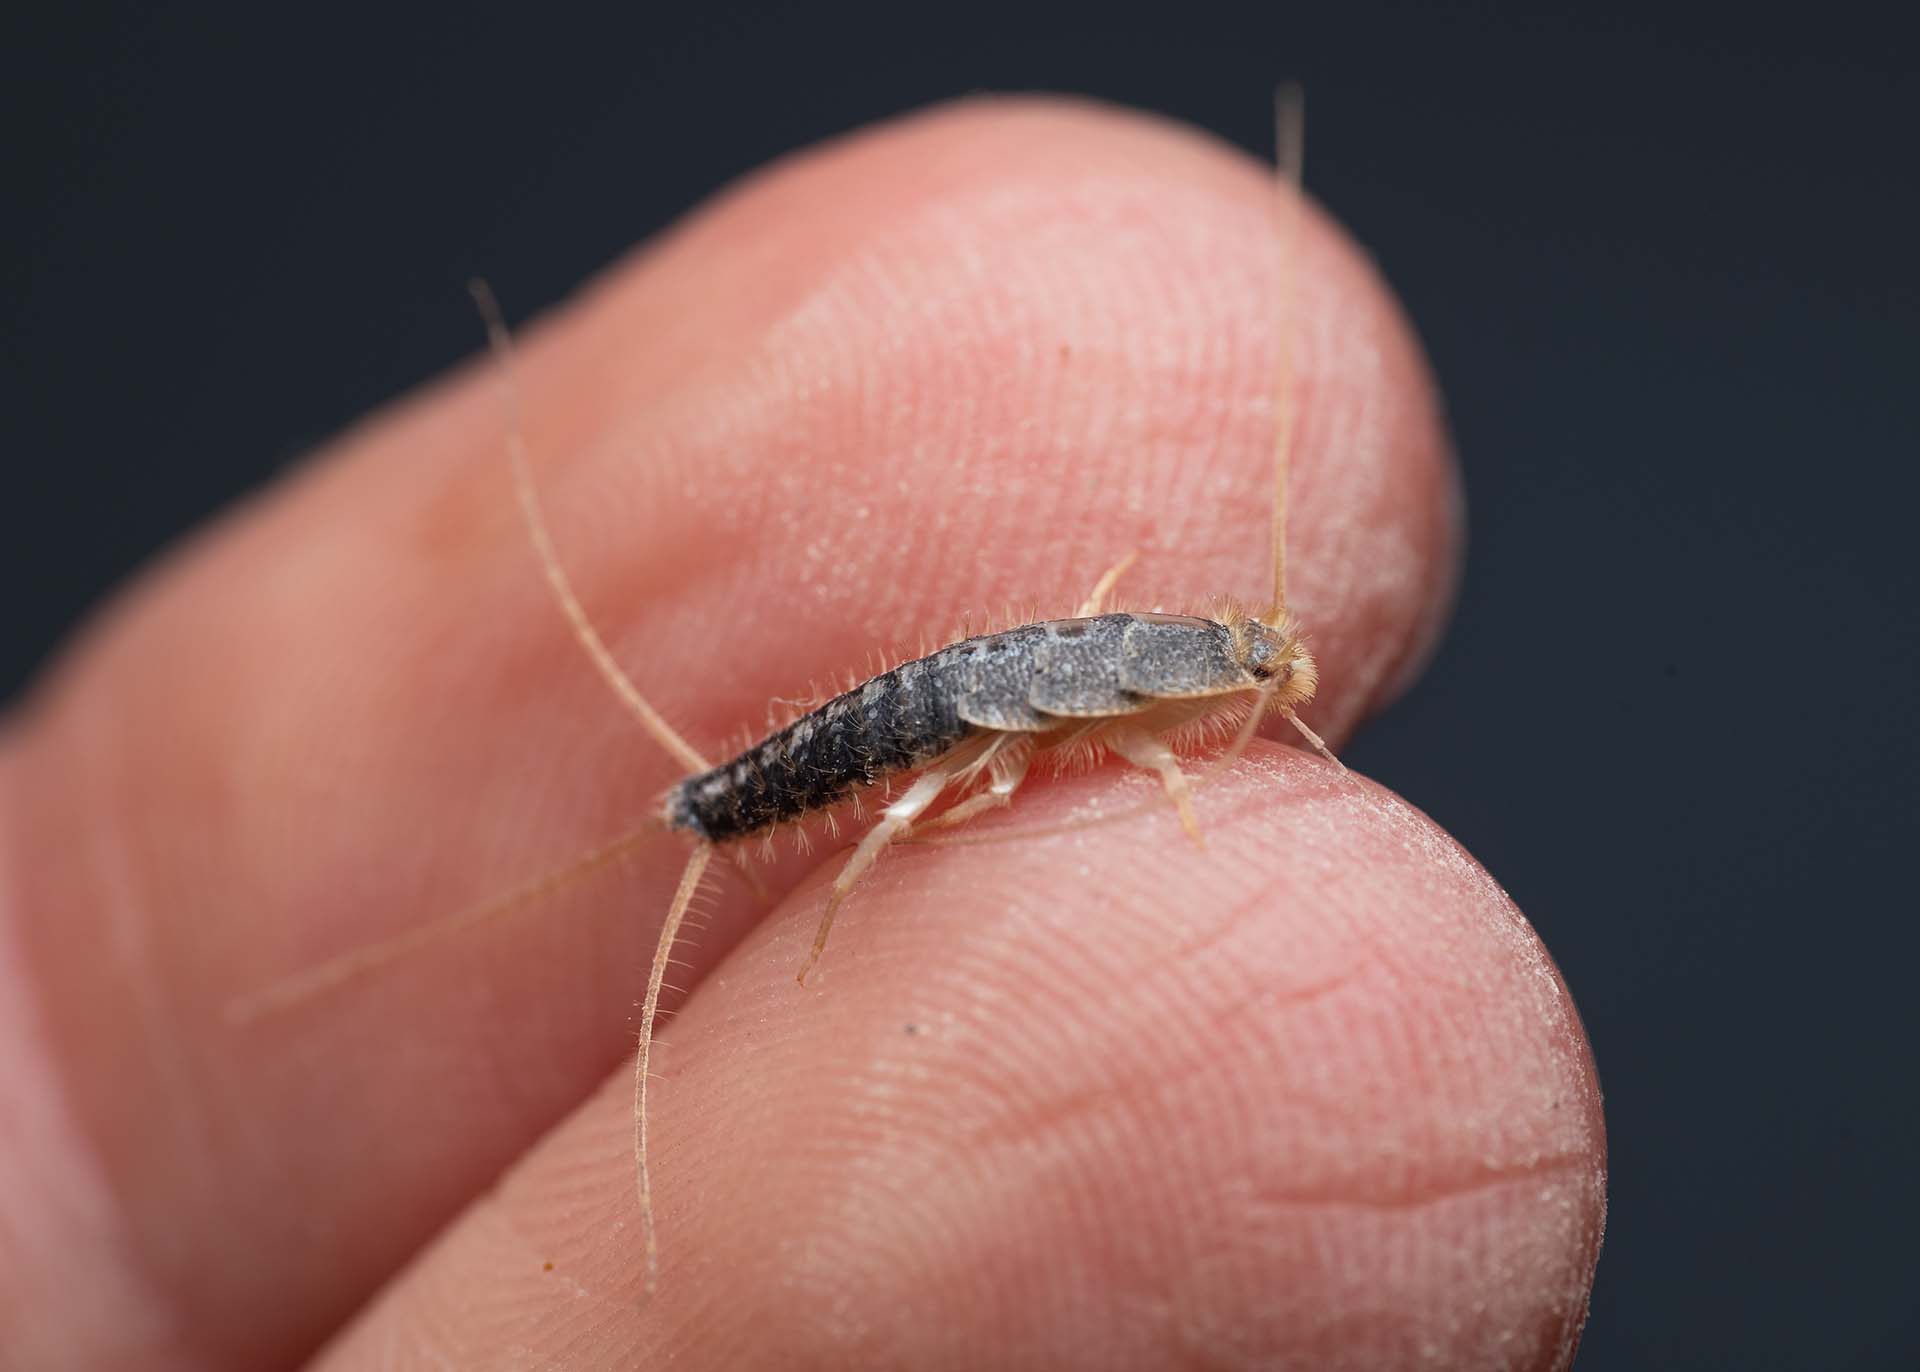 What Are Silverfish?